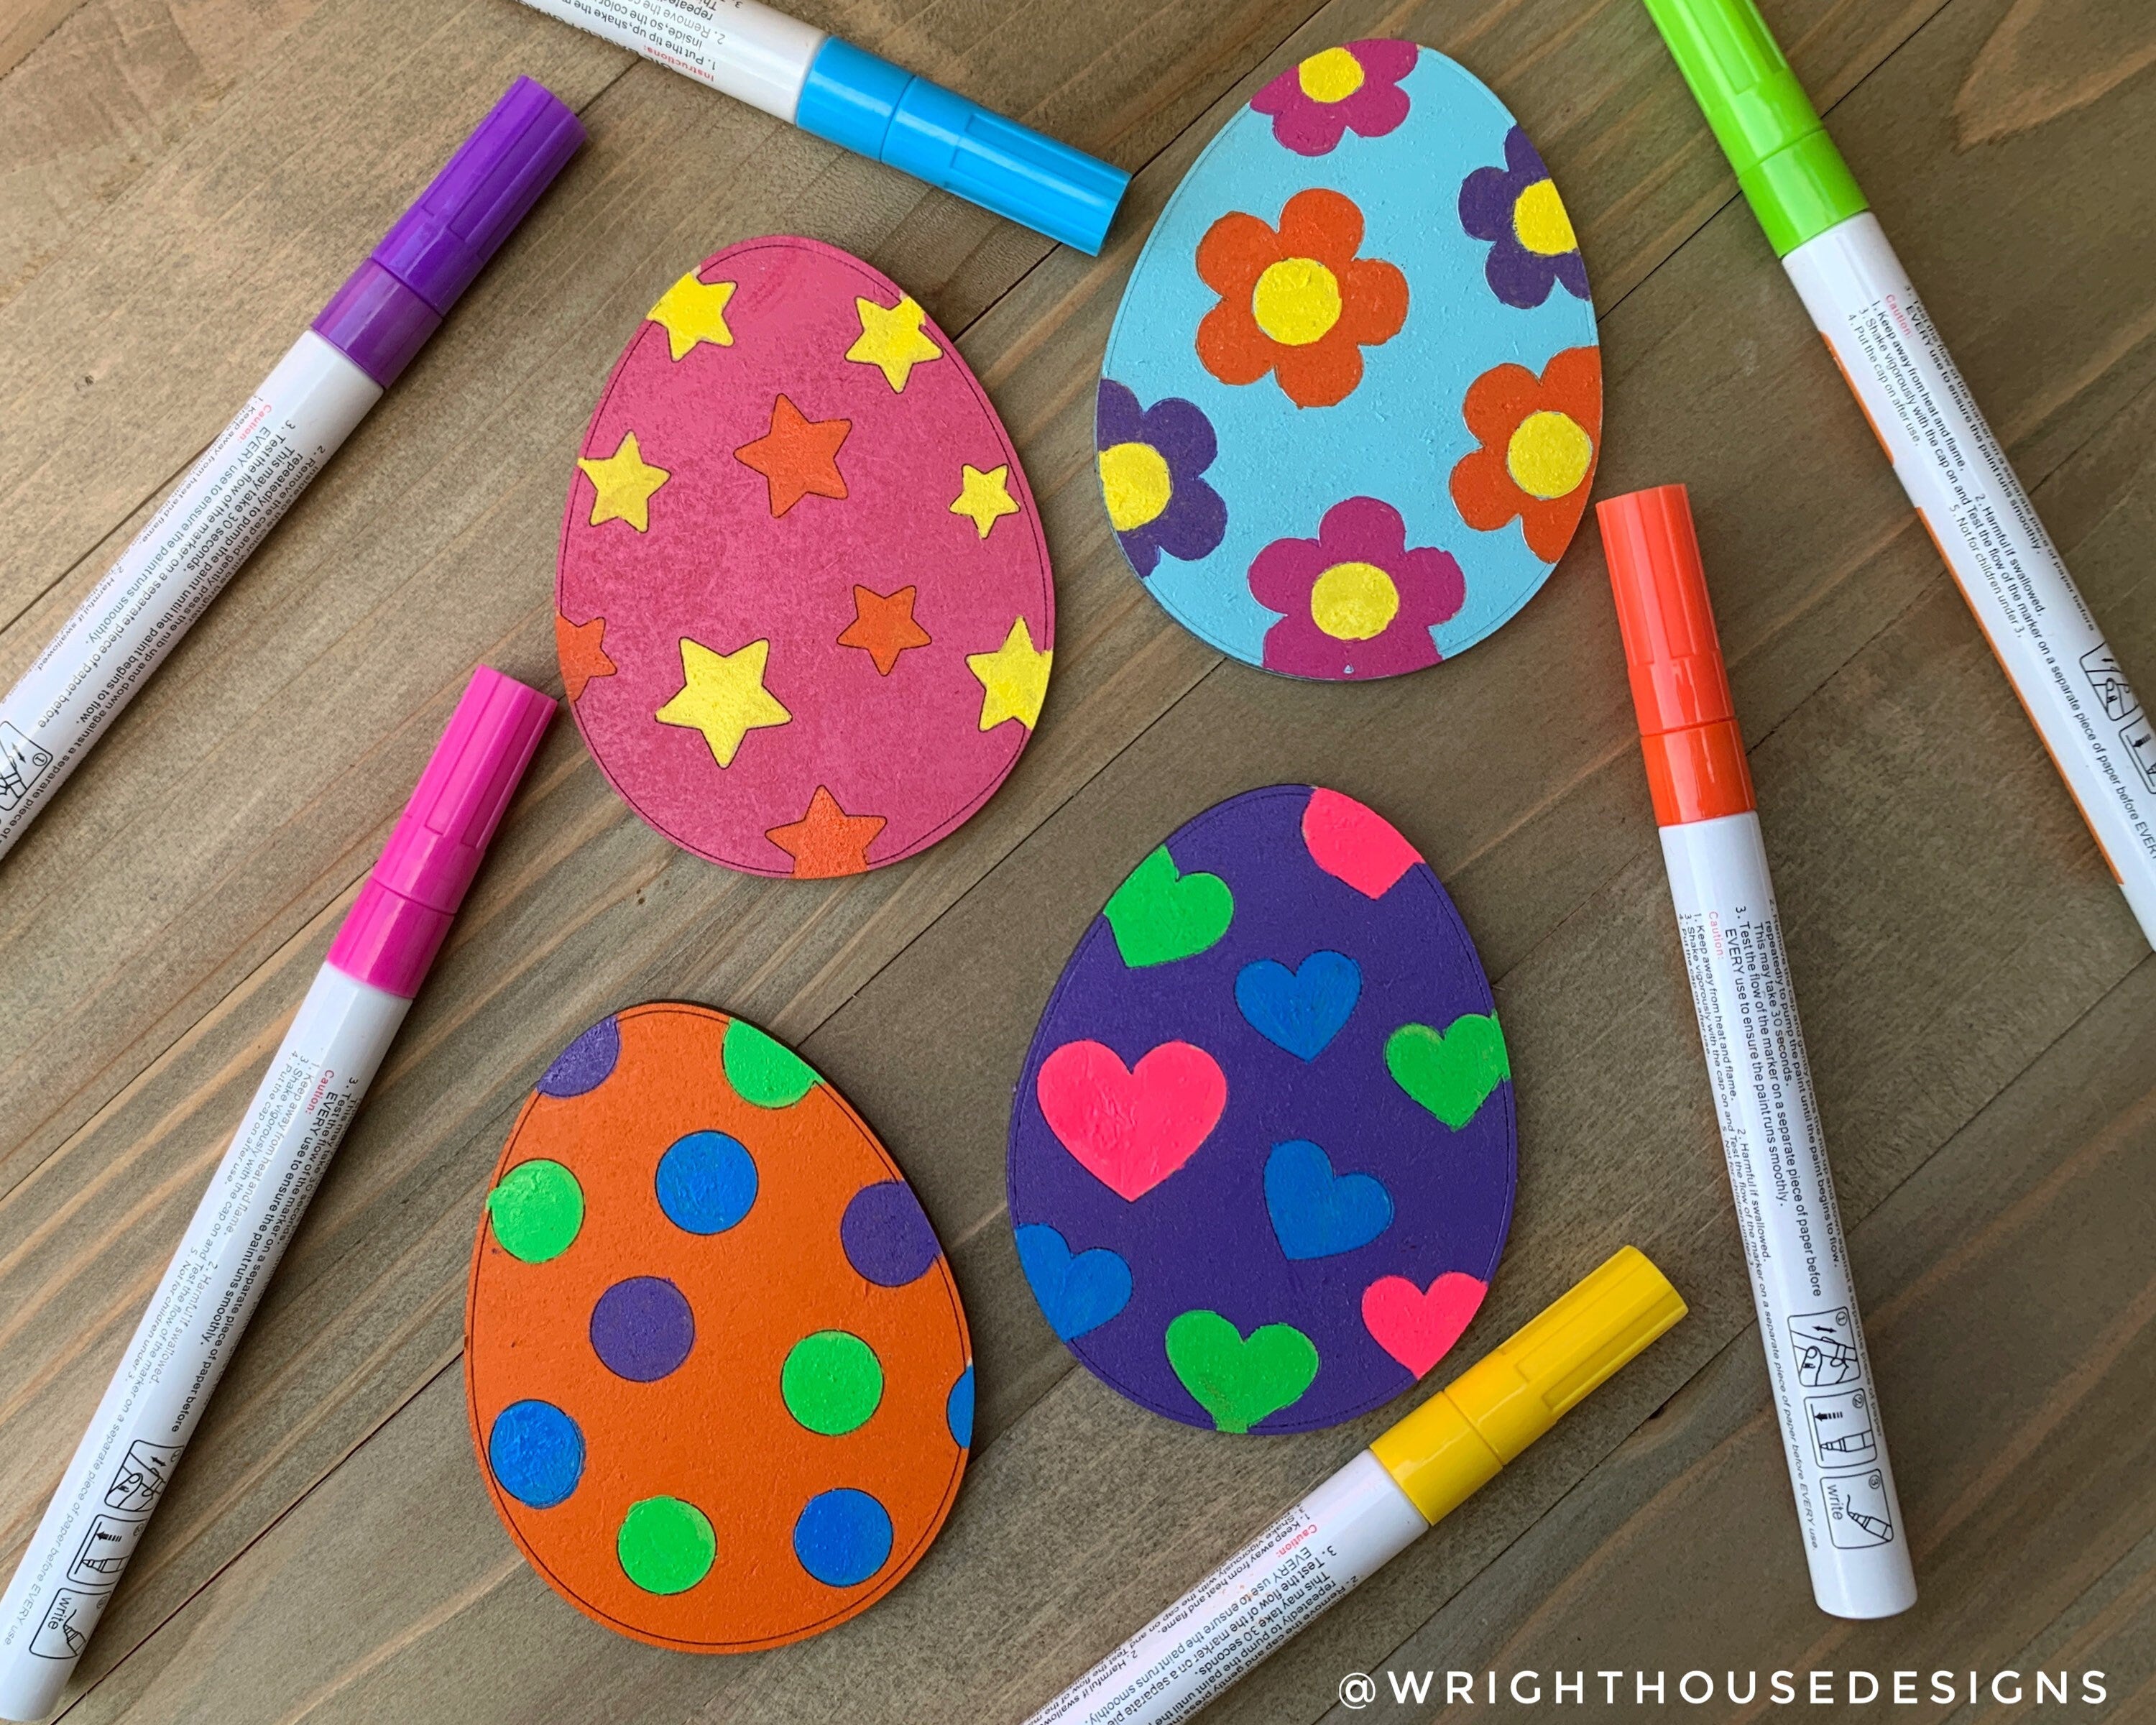 Kid's Mess Free Laser Cut Easter Eggs - DIY Wooden Peel and Paint Craft - Easter Basket Fillers - Easter Bunny Gifts - Spring Gift Bag Tags